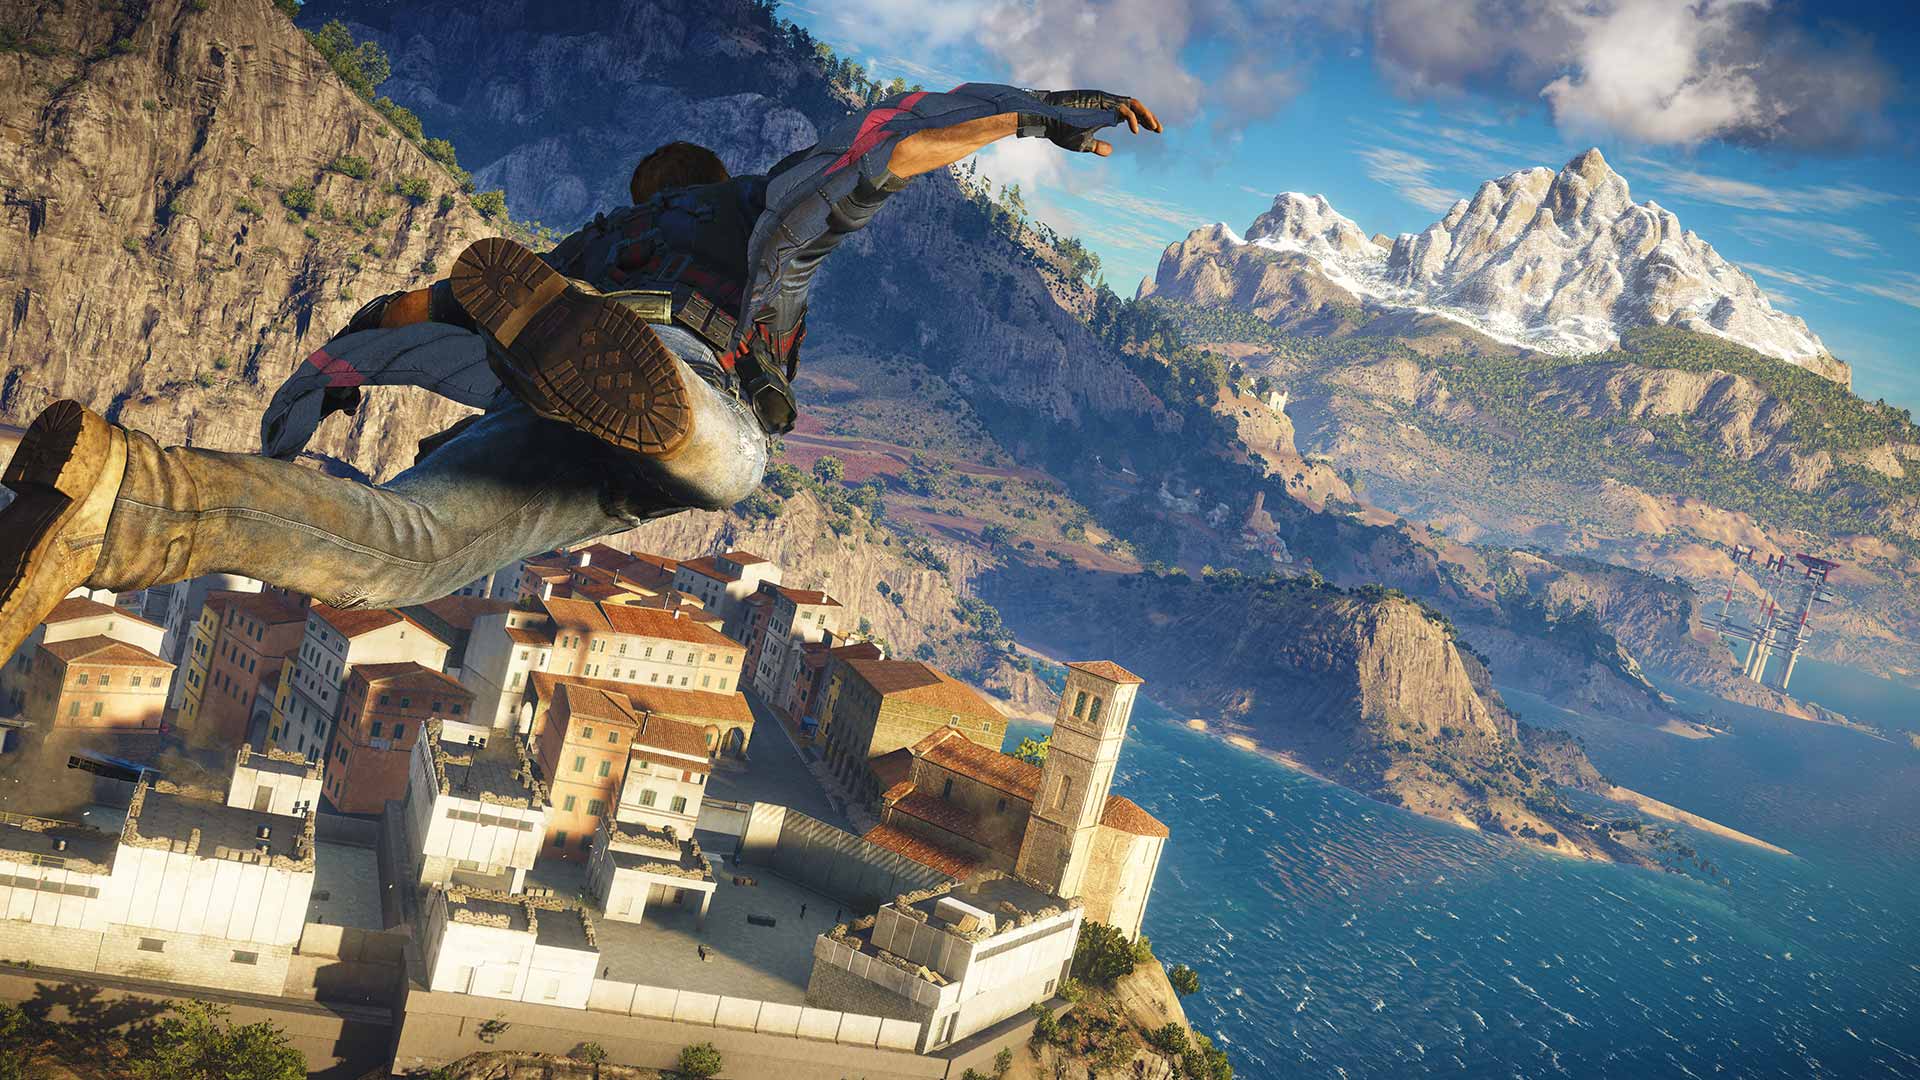  Just Cause 3 - PlayStation 4 : Movies & TV